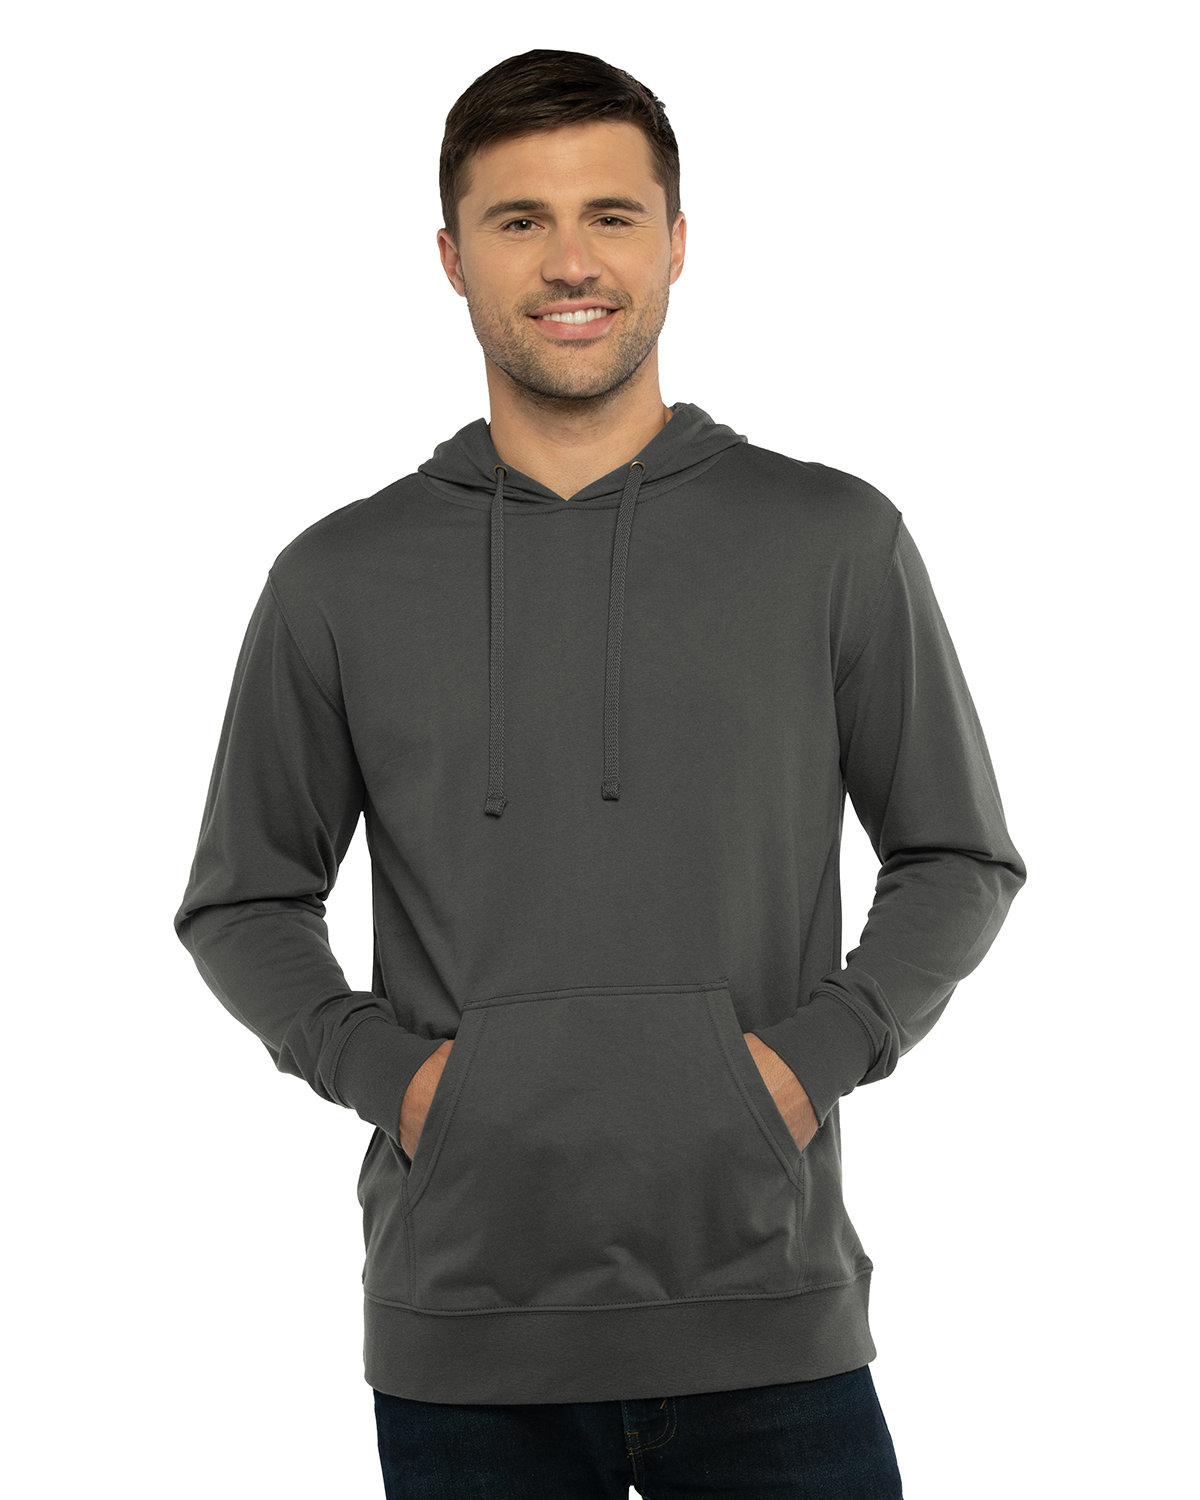 Next Level Apparel Unisex French Terry Pullover Hoodie HVY MTL/ HVY MTL 